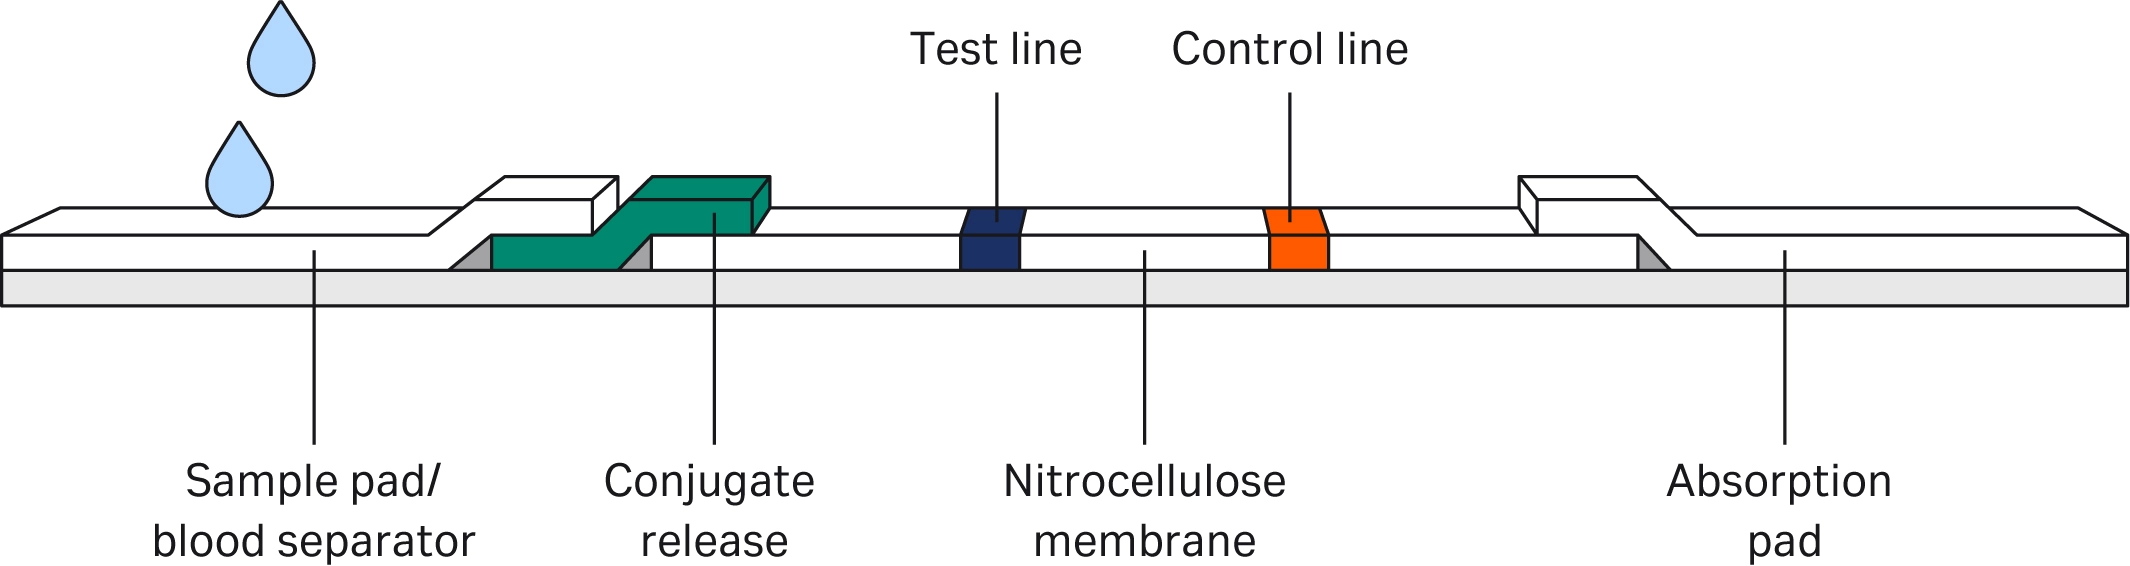 Lateral flow immunoassay drawing